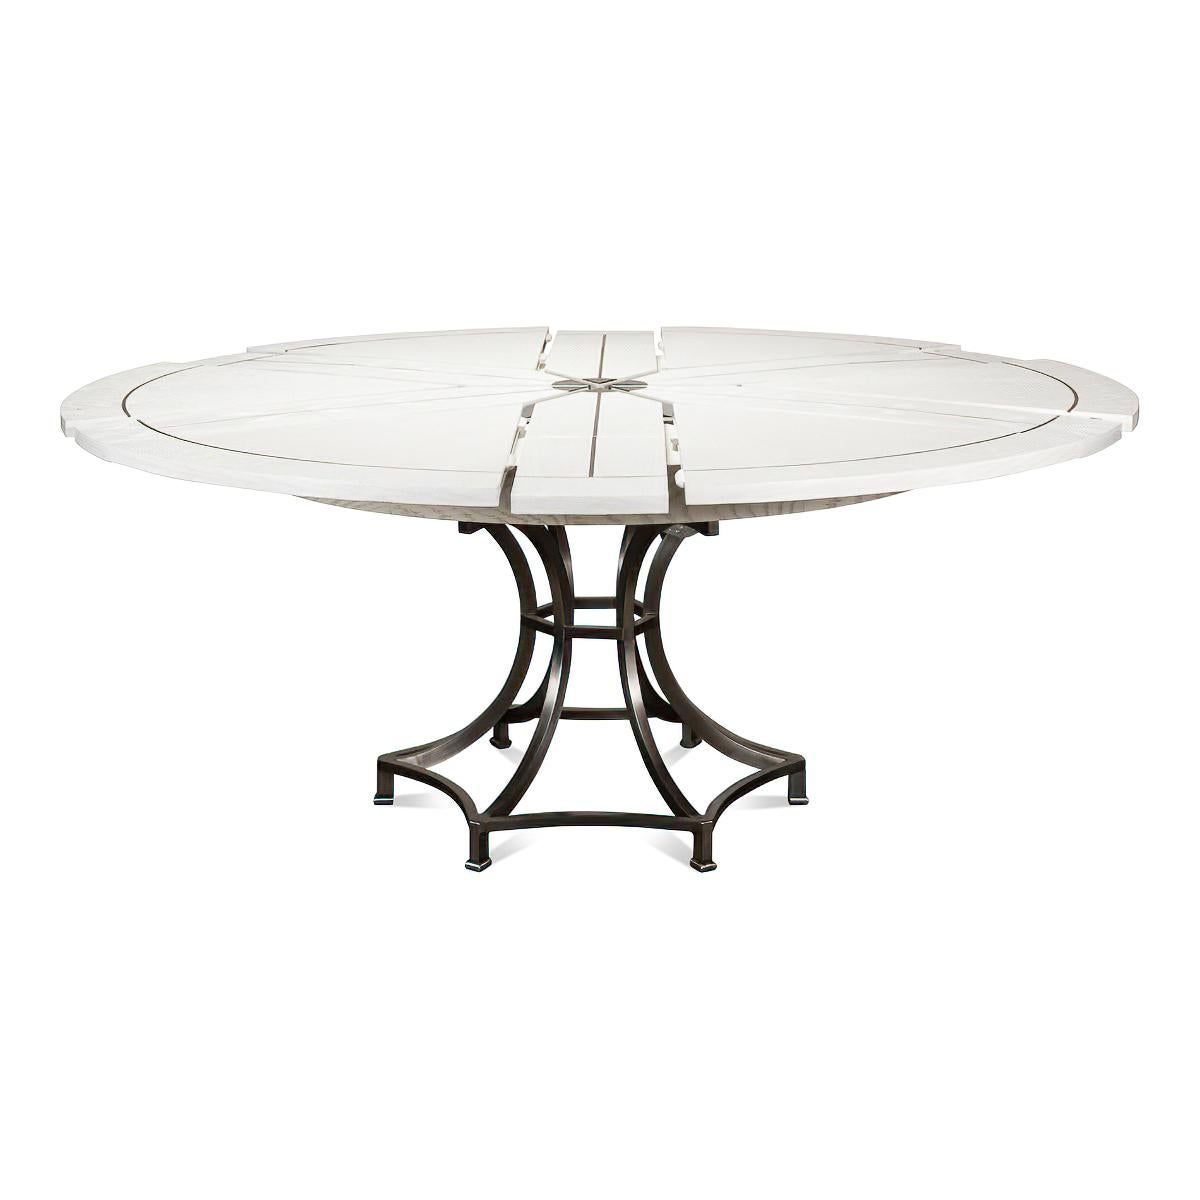 A Modern Industrial style round extending dining table. Featuring a white finish oak top with gunmetal inlays on a metal pedestal column base.

Open dimensions: 70